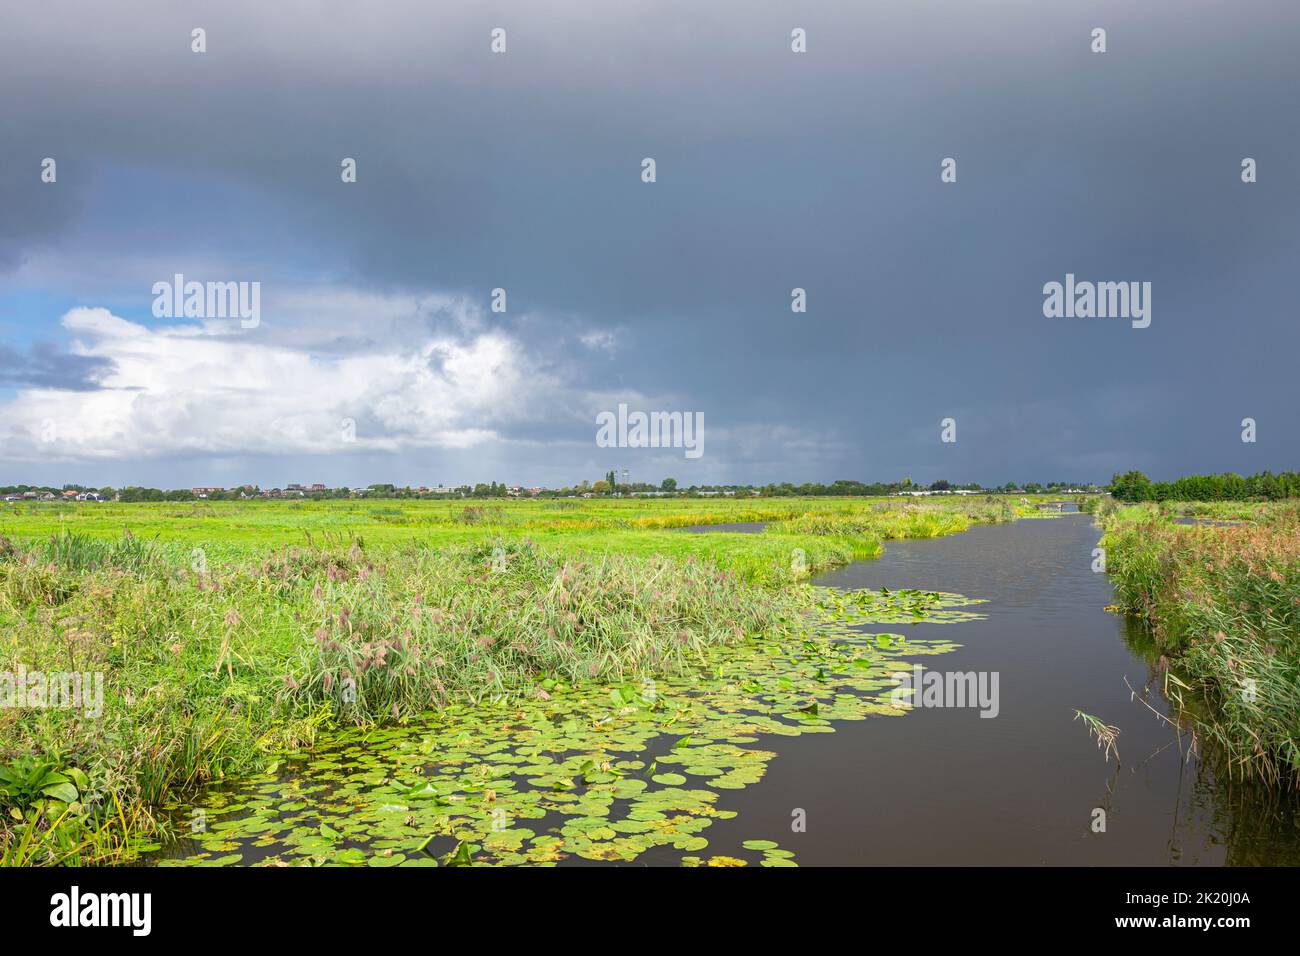 Ditch with water lilies in the countryside near Gouda, Holland. A rain shower in the distance is approaching. Stock Photo